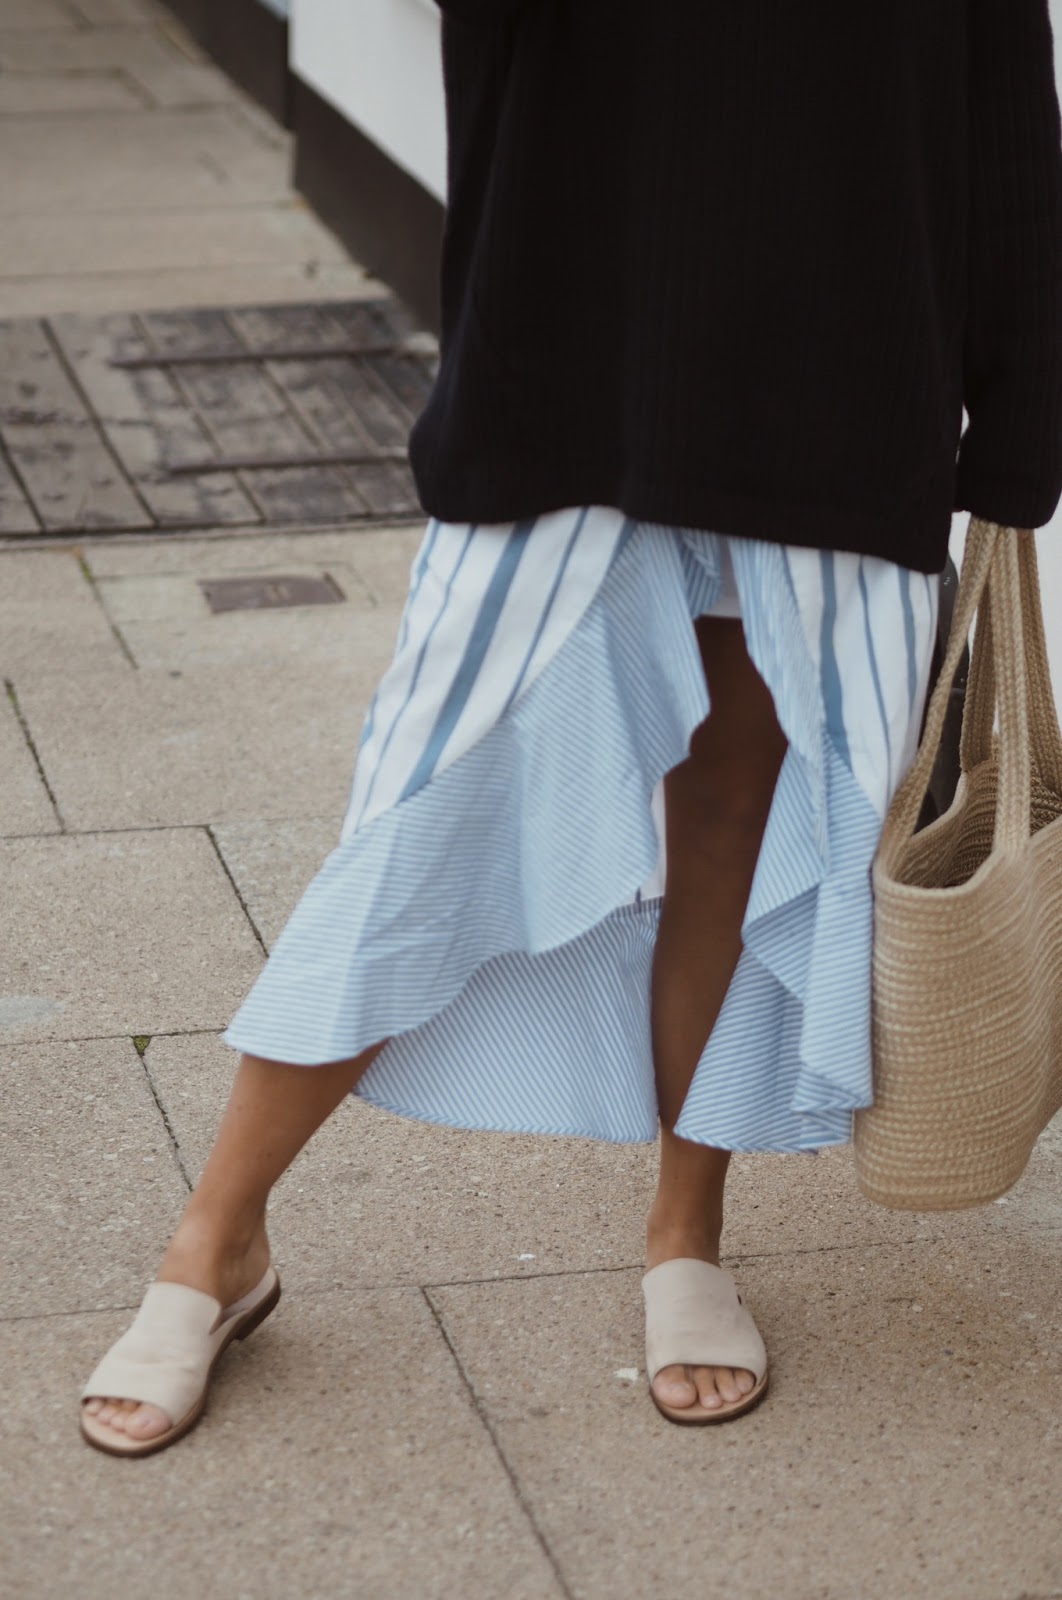 Skirt And Jumper Combination - Petite Side of Style